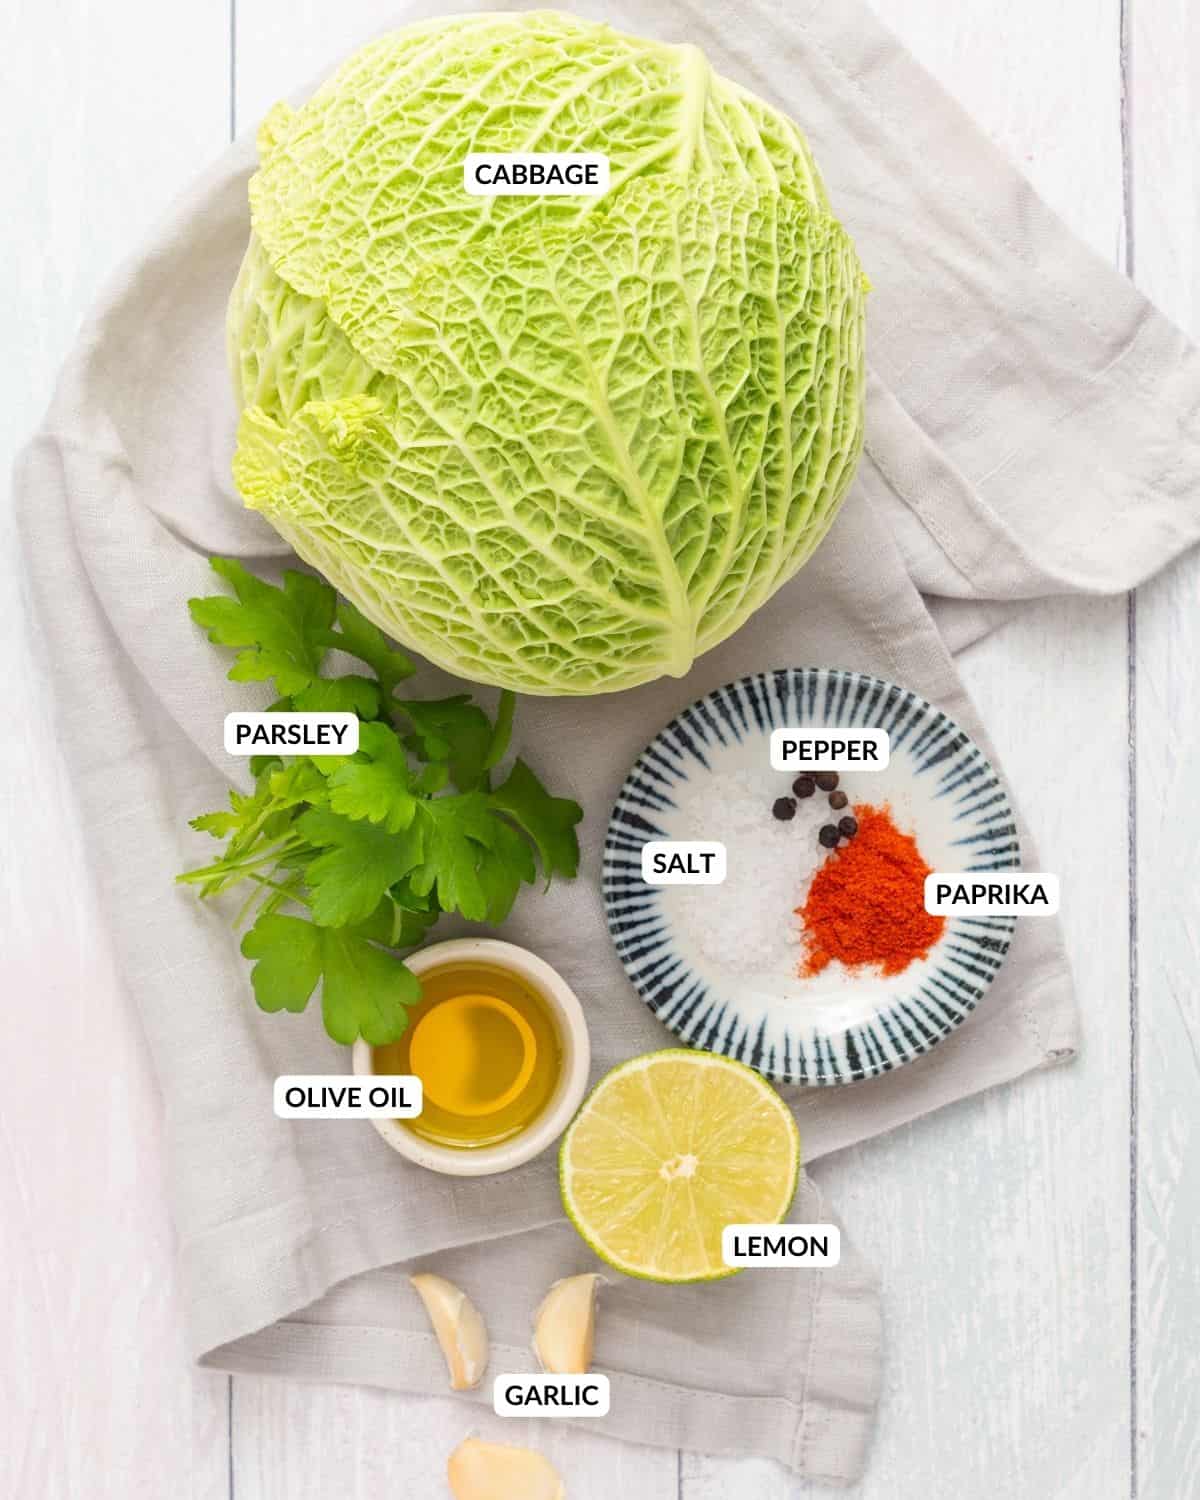 An overhead image of a head of cabbage, a slice of lemon, olive oil, garlic cloves, seasonings, and fresh parsley on a table with labels on each one.